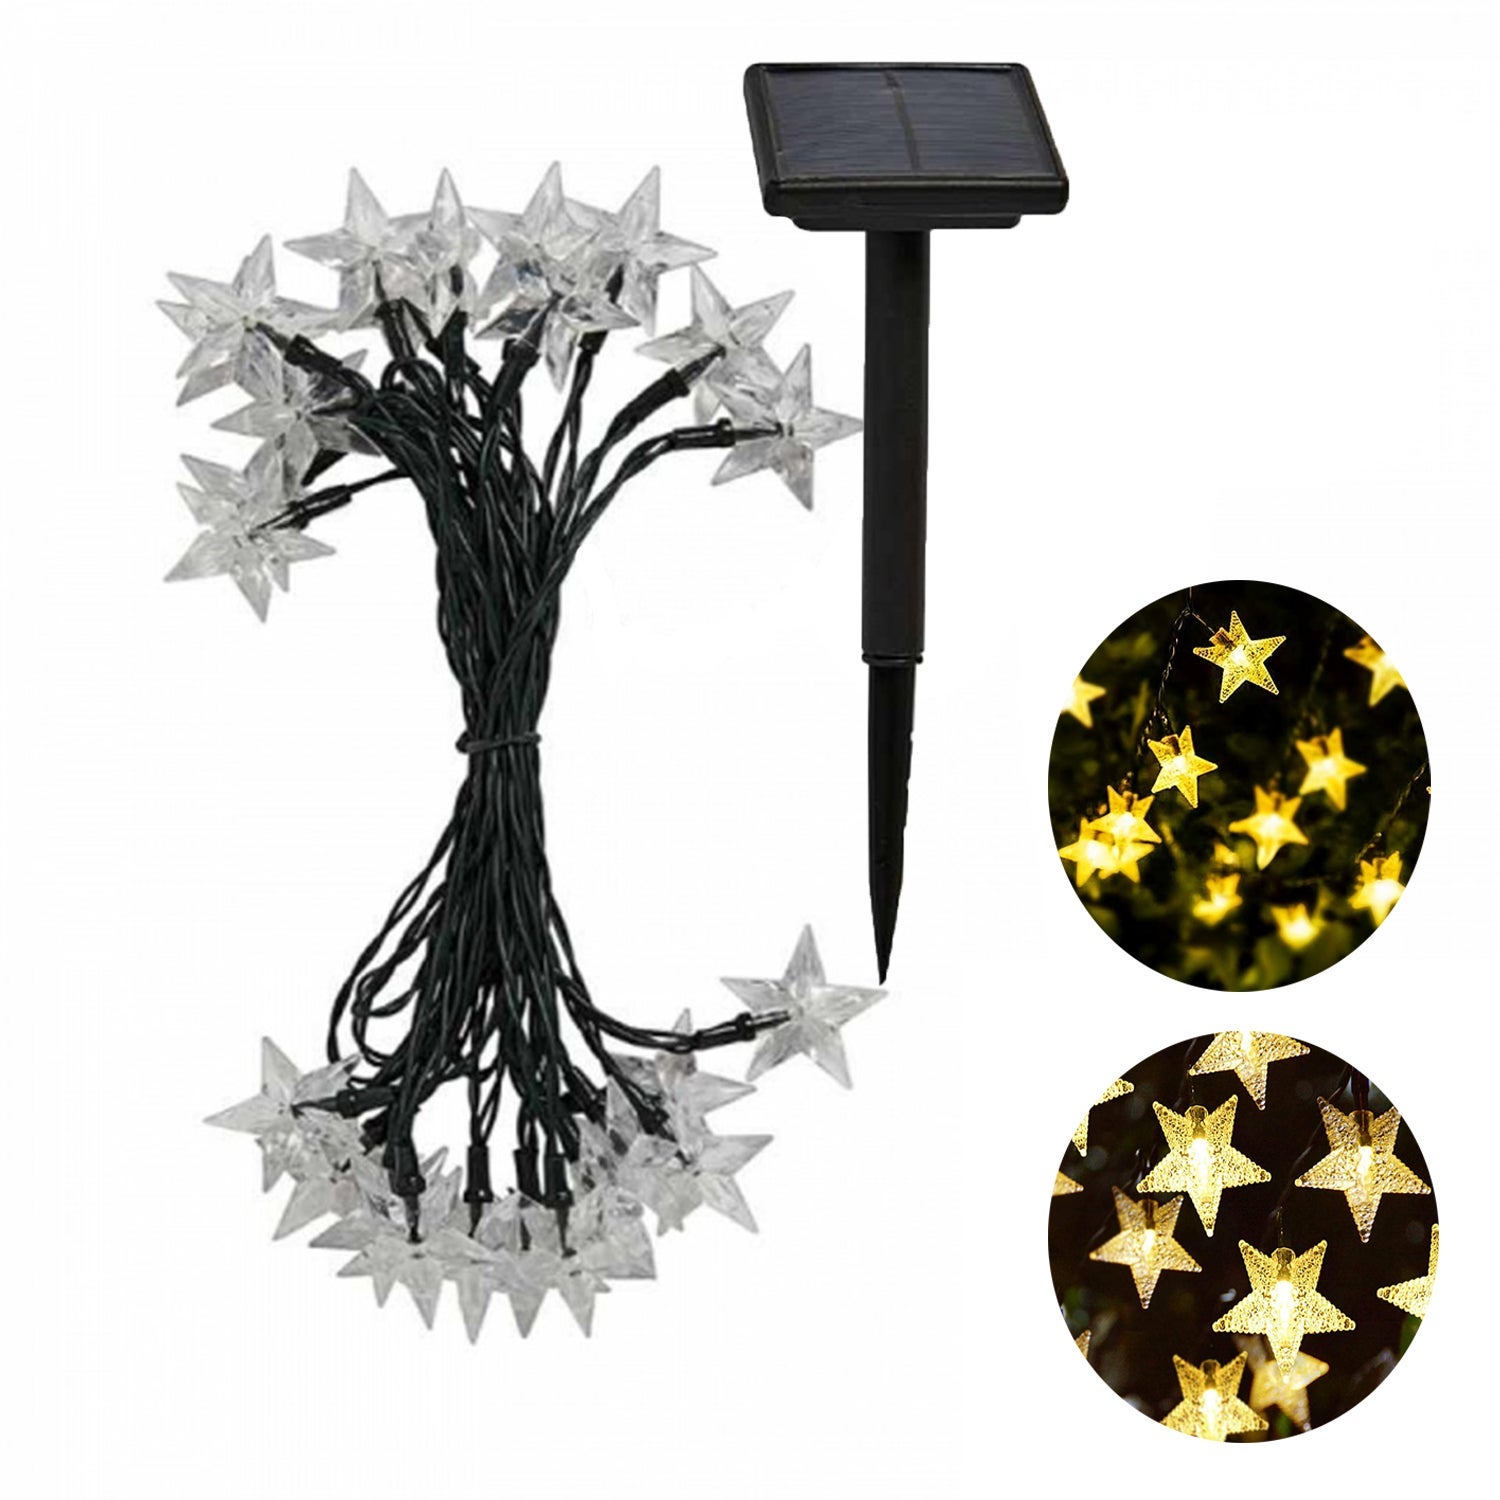 Solar String Lights Honey Bumble Bee, 30 Led 19.7ft 8 Modes Outdoor Lawn